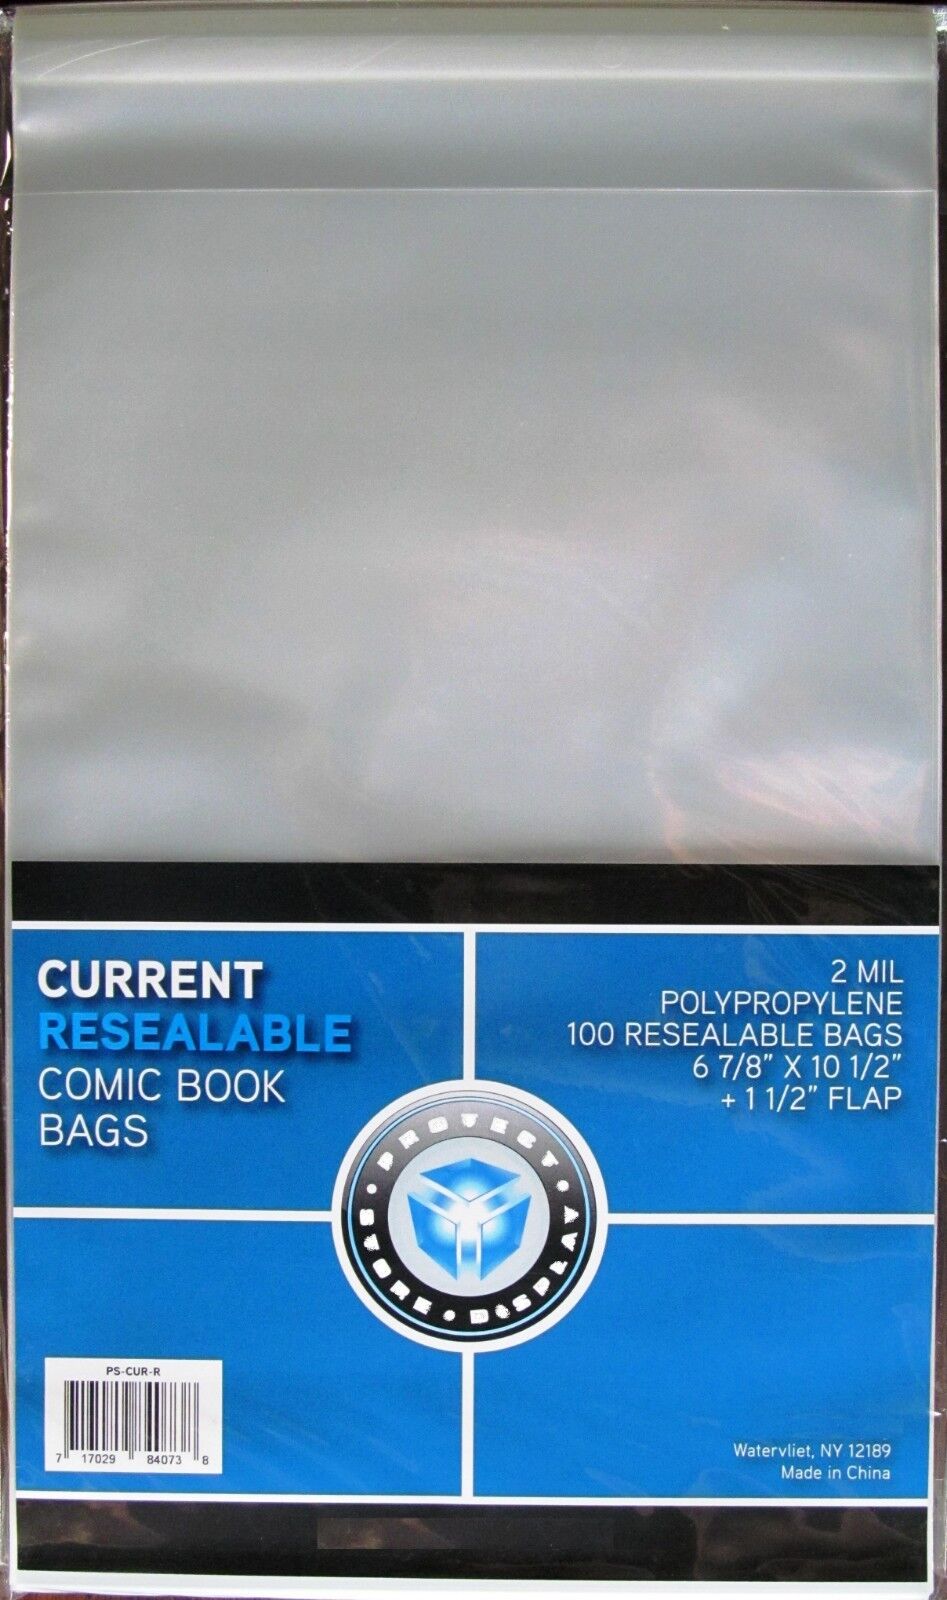 1000 New CSP RESEALABLE CURRENT Comic Book Archival Poly Bags 6 7/8 X 10 1/2